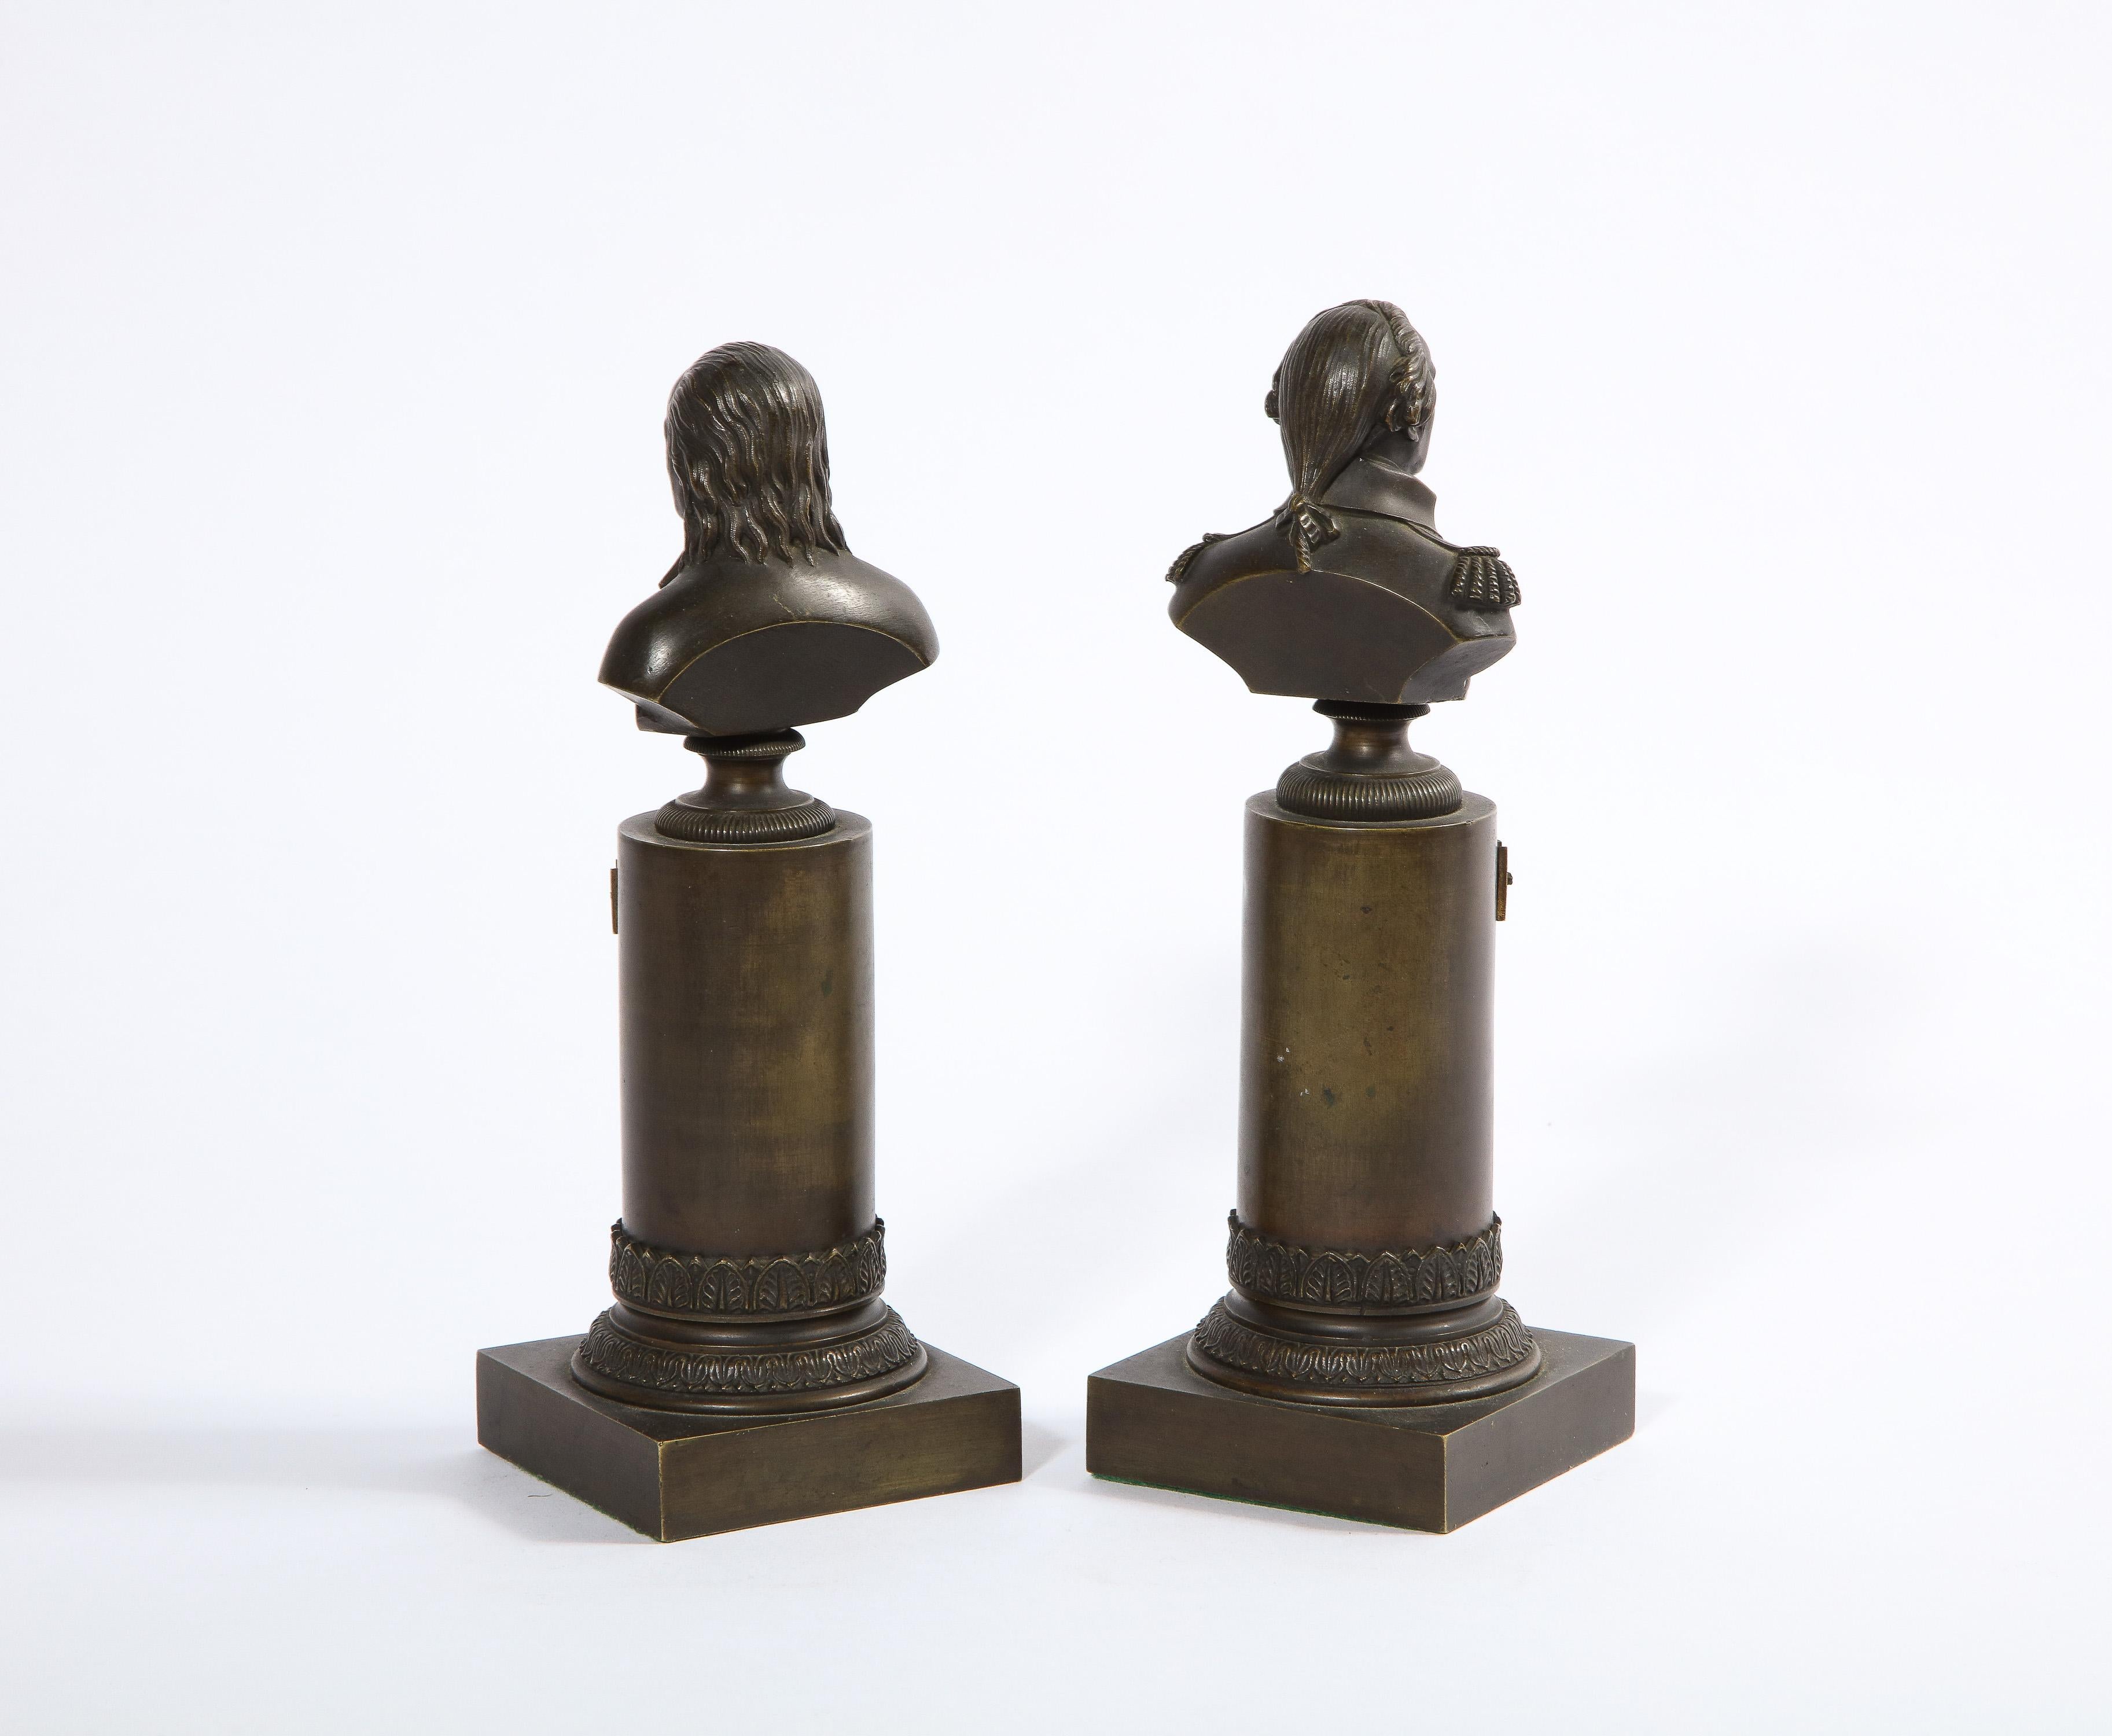 Rare Pair of American Bronze Busts of George Washington and Benjamin Franklin 2